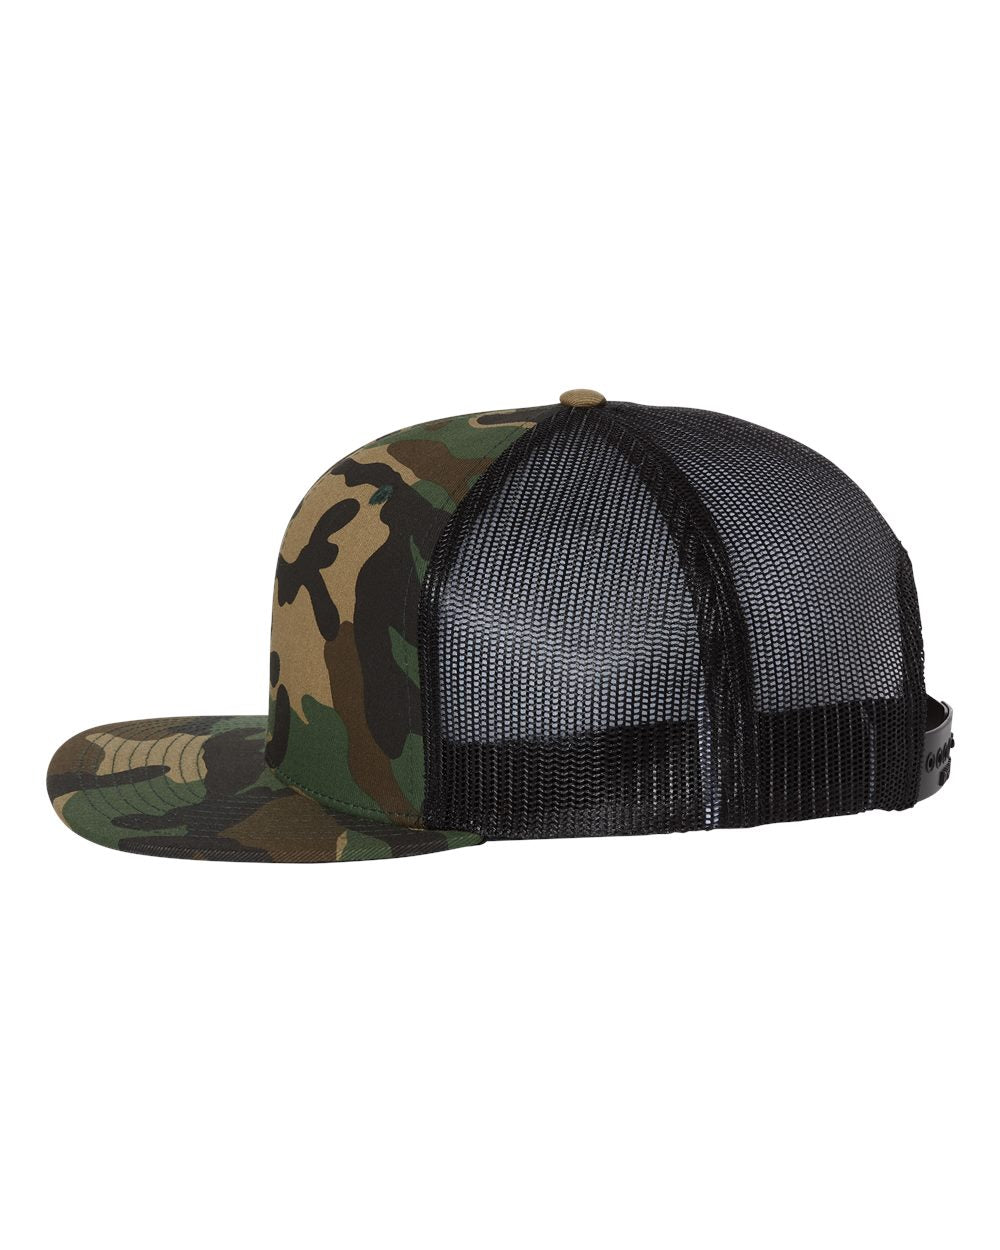 Side view of Richardson 511 custom hat in green camo and black